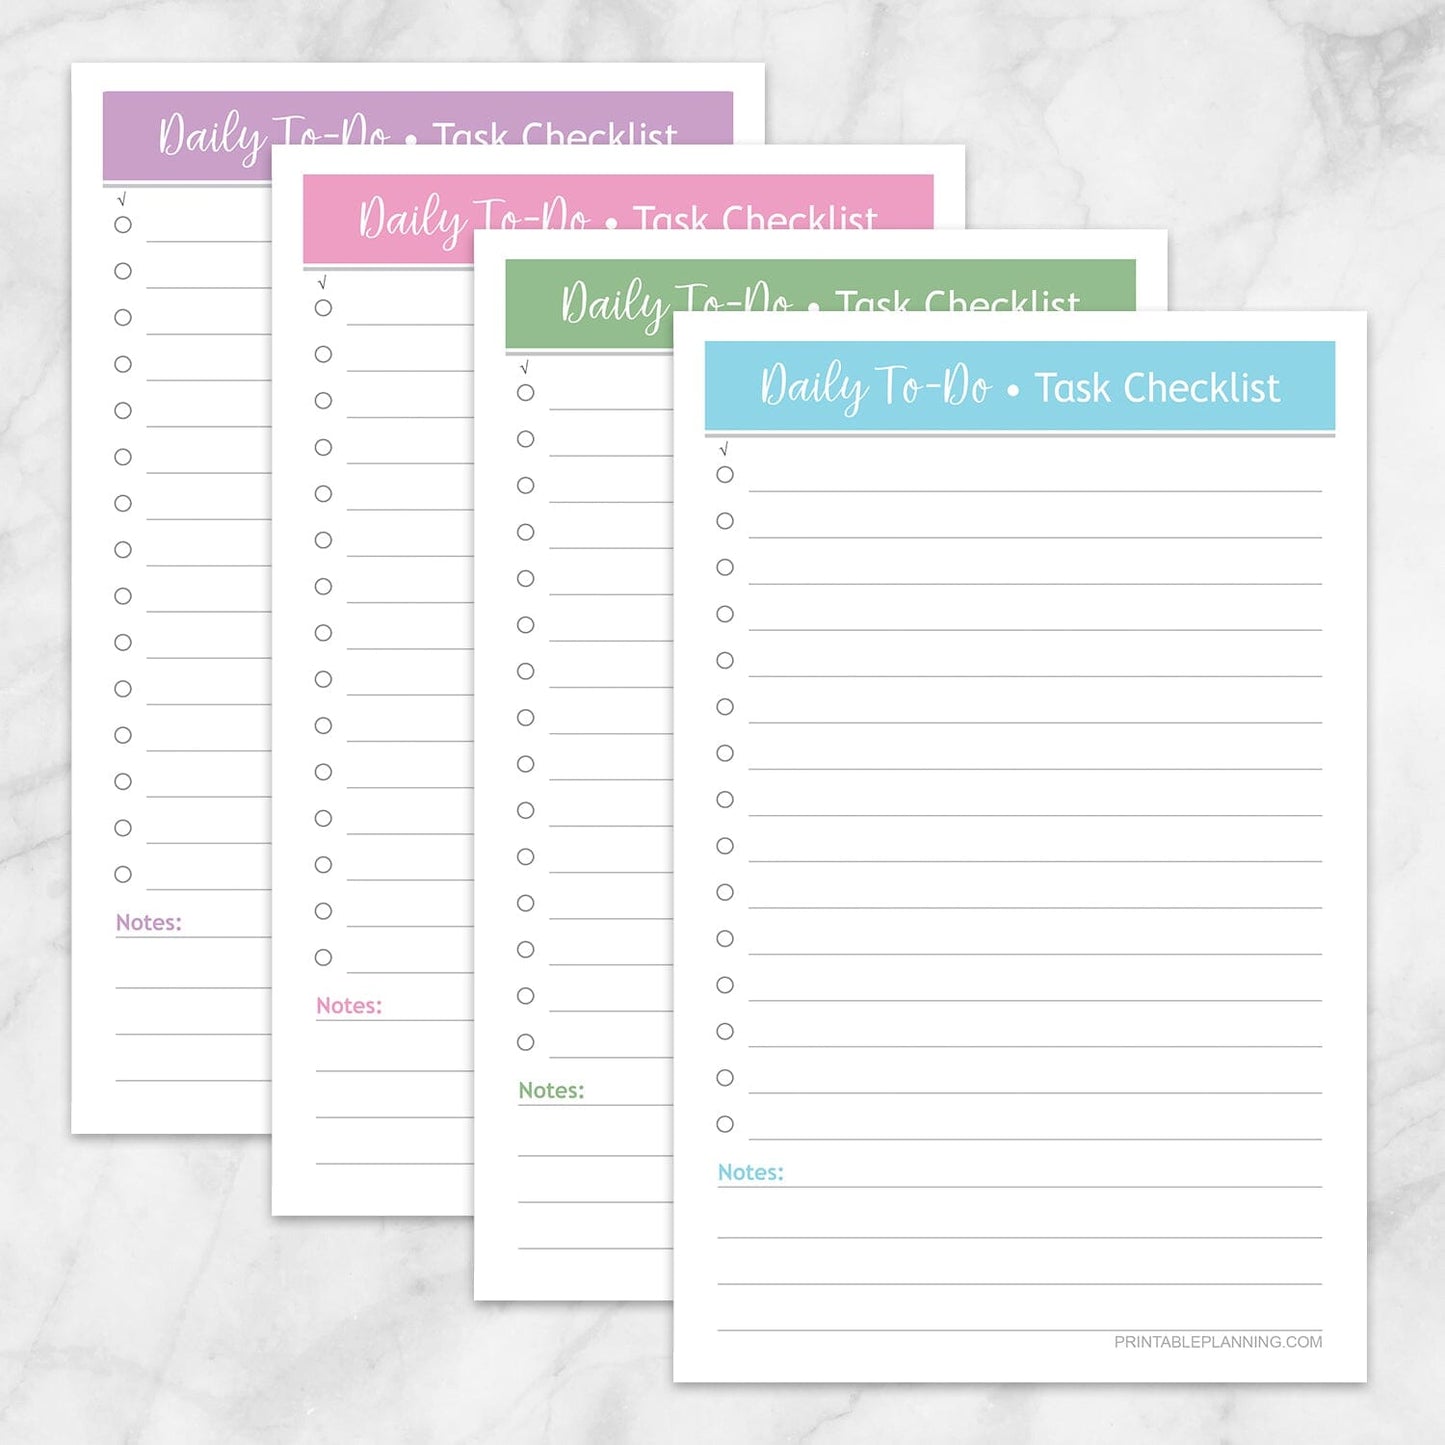 Printable Daily To-Do Lists - 2 Per Page - Task Checklists BUNDLE in 4 Colors at Printable Planning.